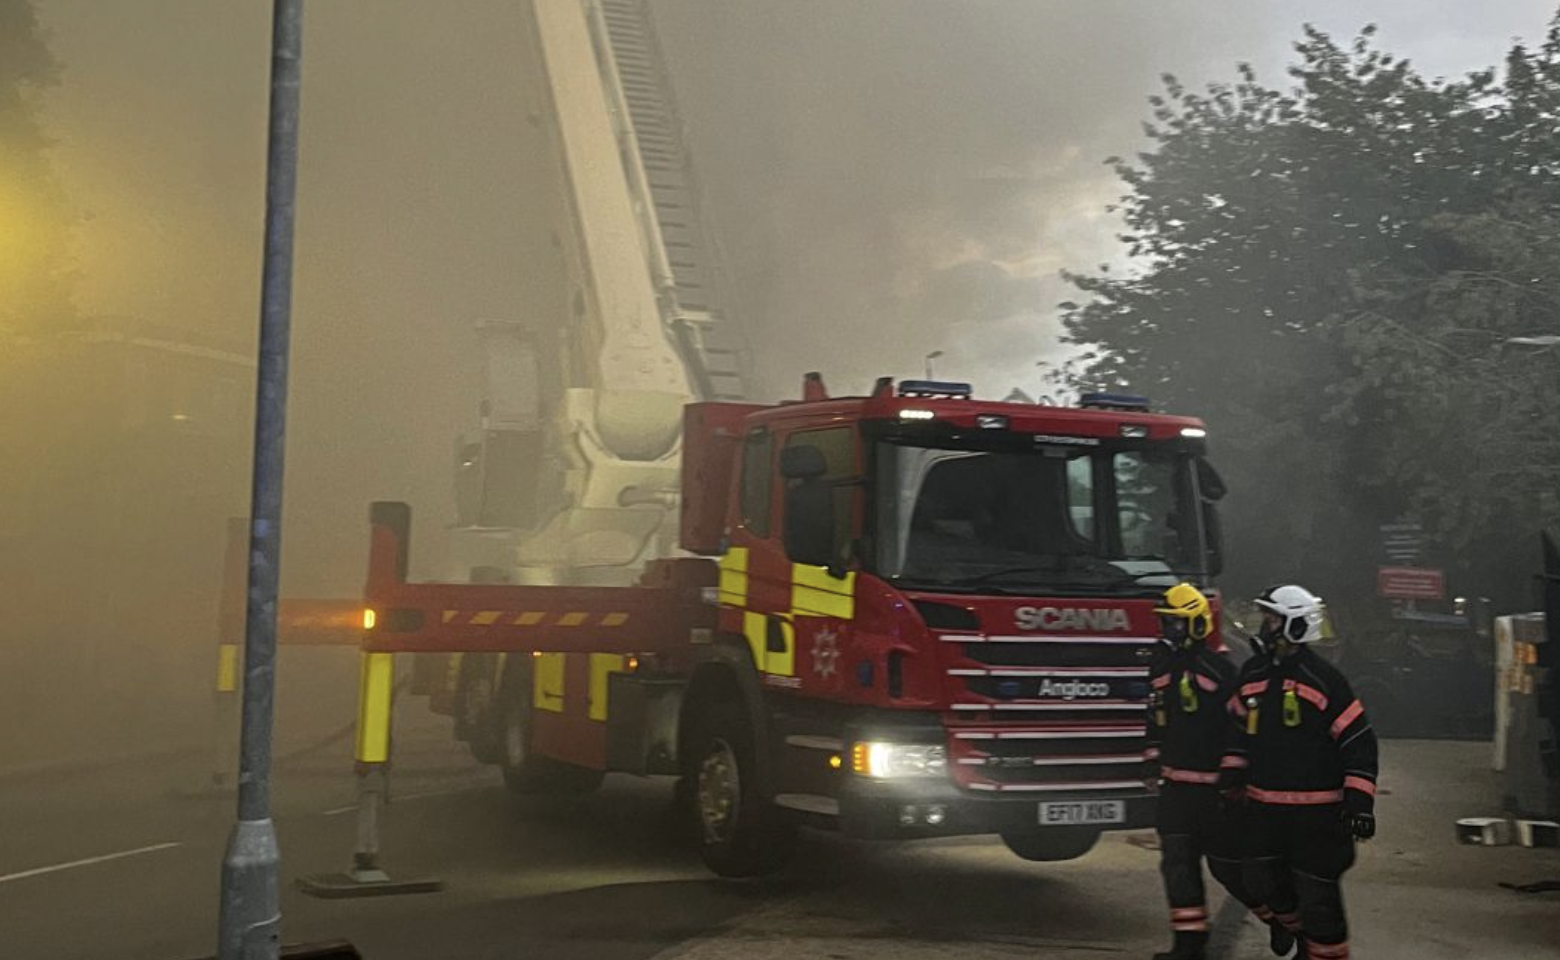 baldock-industrial-estate-fire-image-hertfordshire-county-council.png